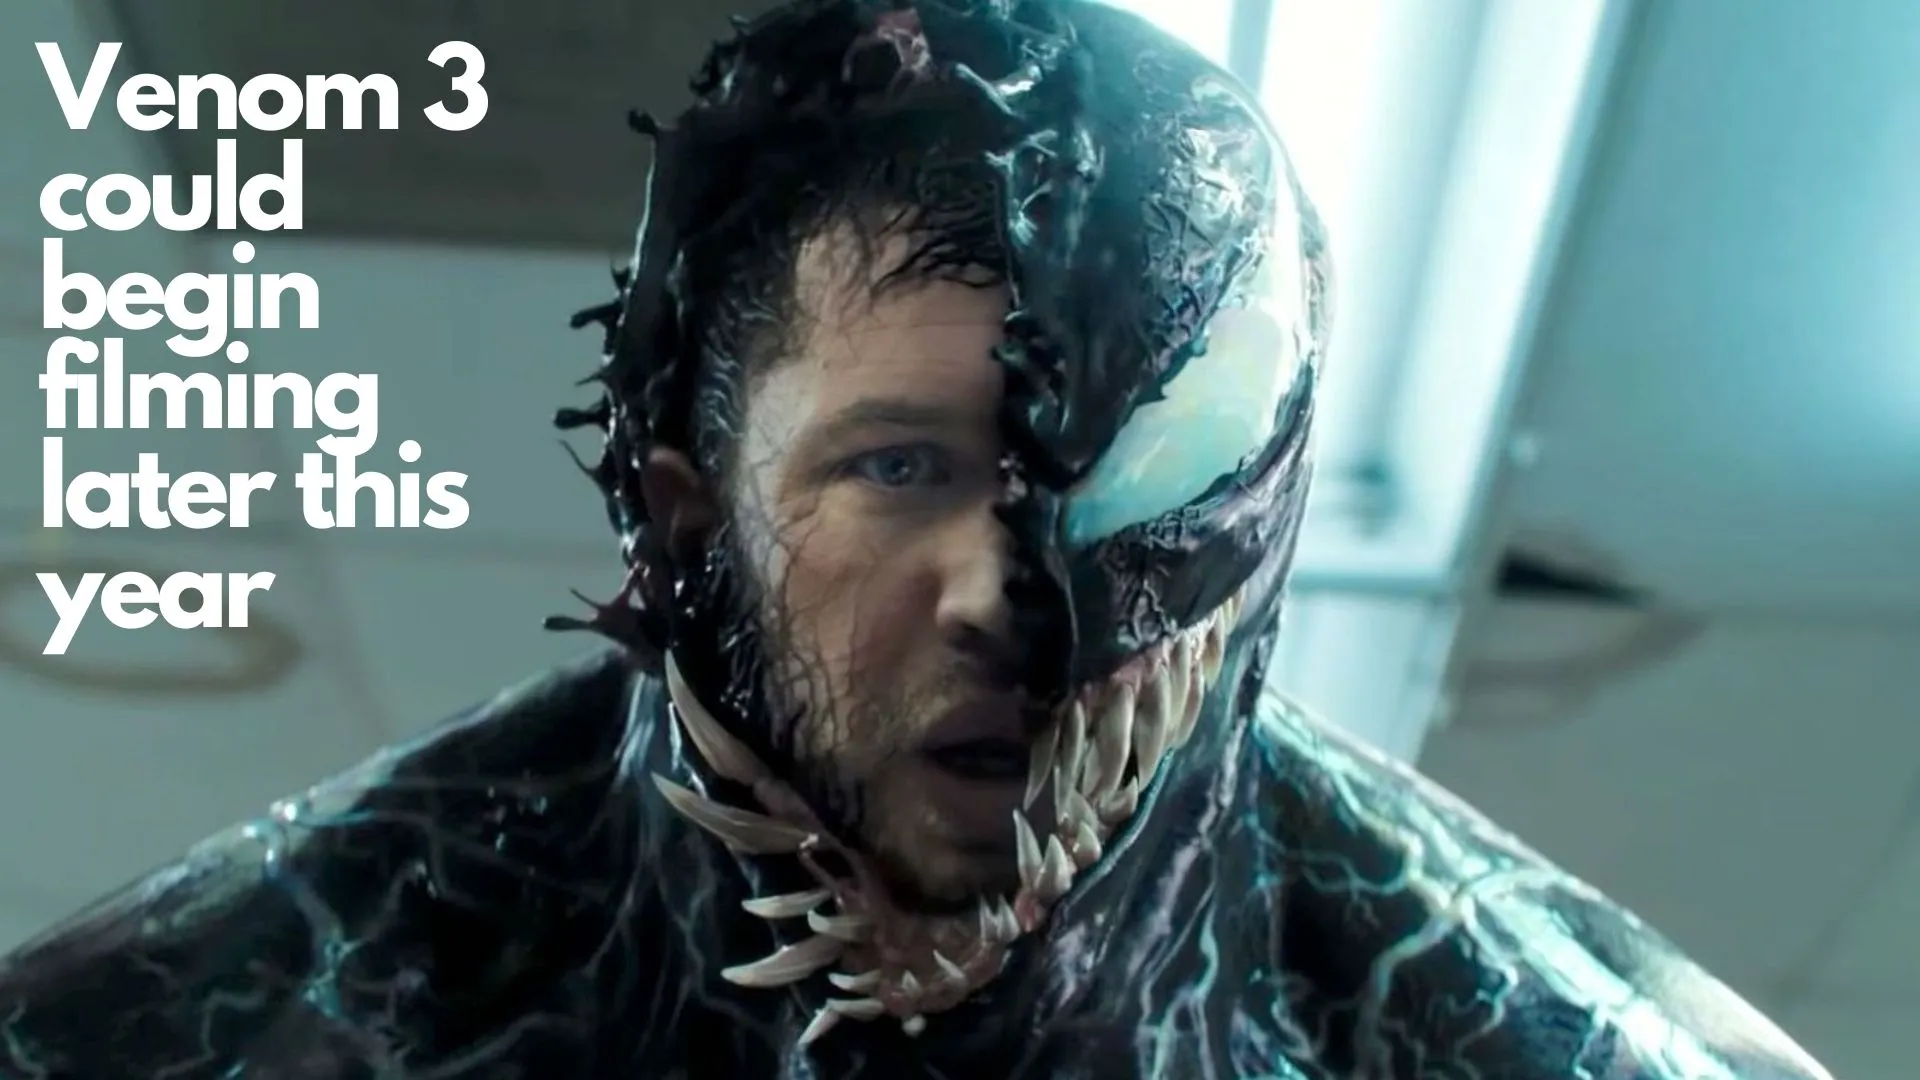 Venom 3 could begin filming later this year (Image credit: Looper)